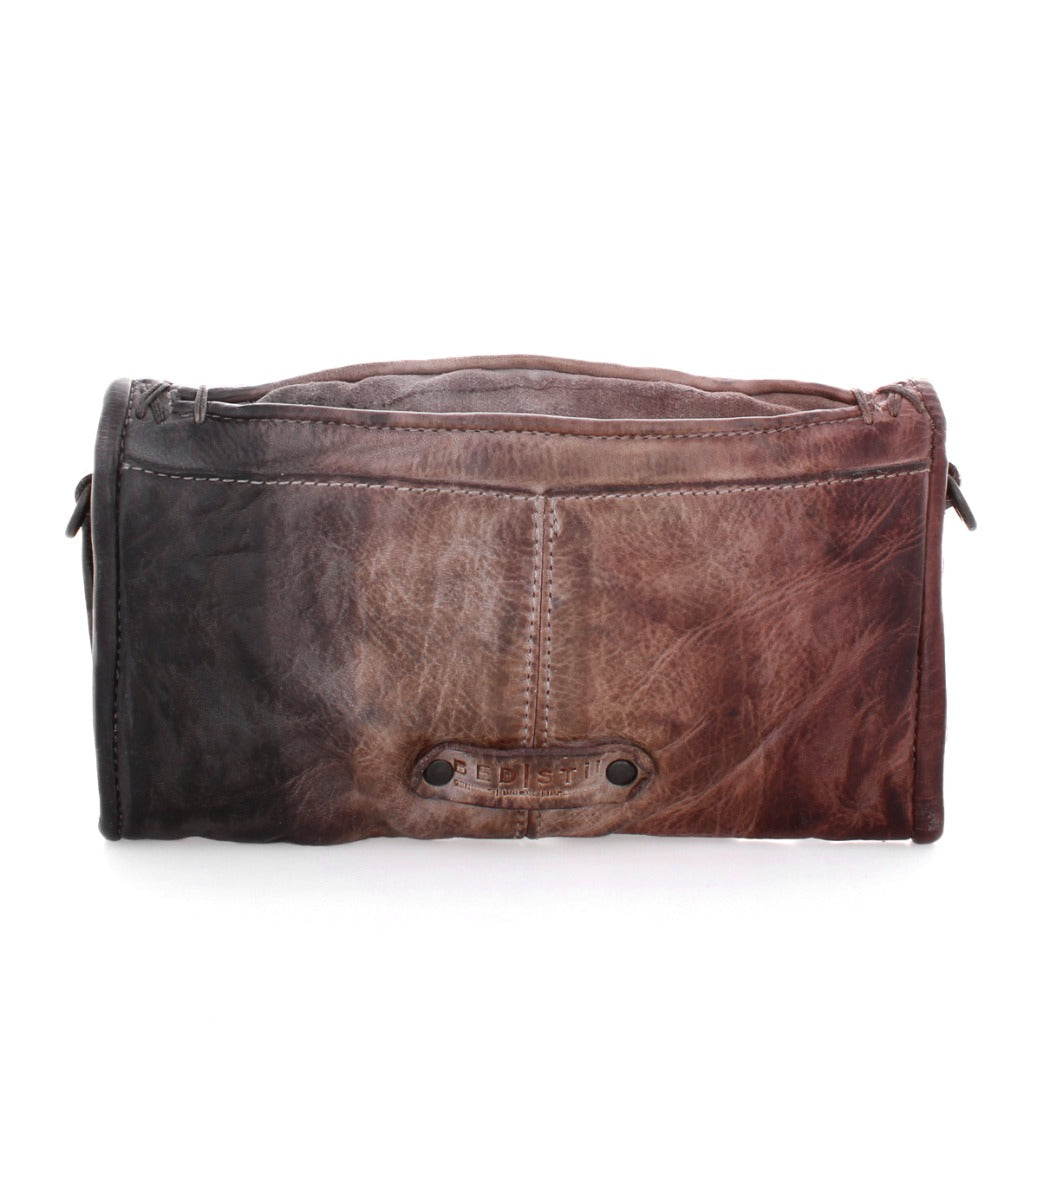 An image of an Amina bag by Bed Stu, made of brown leather, with a zipper.